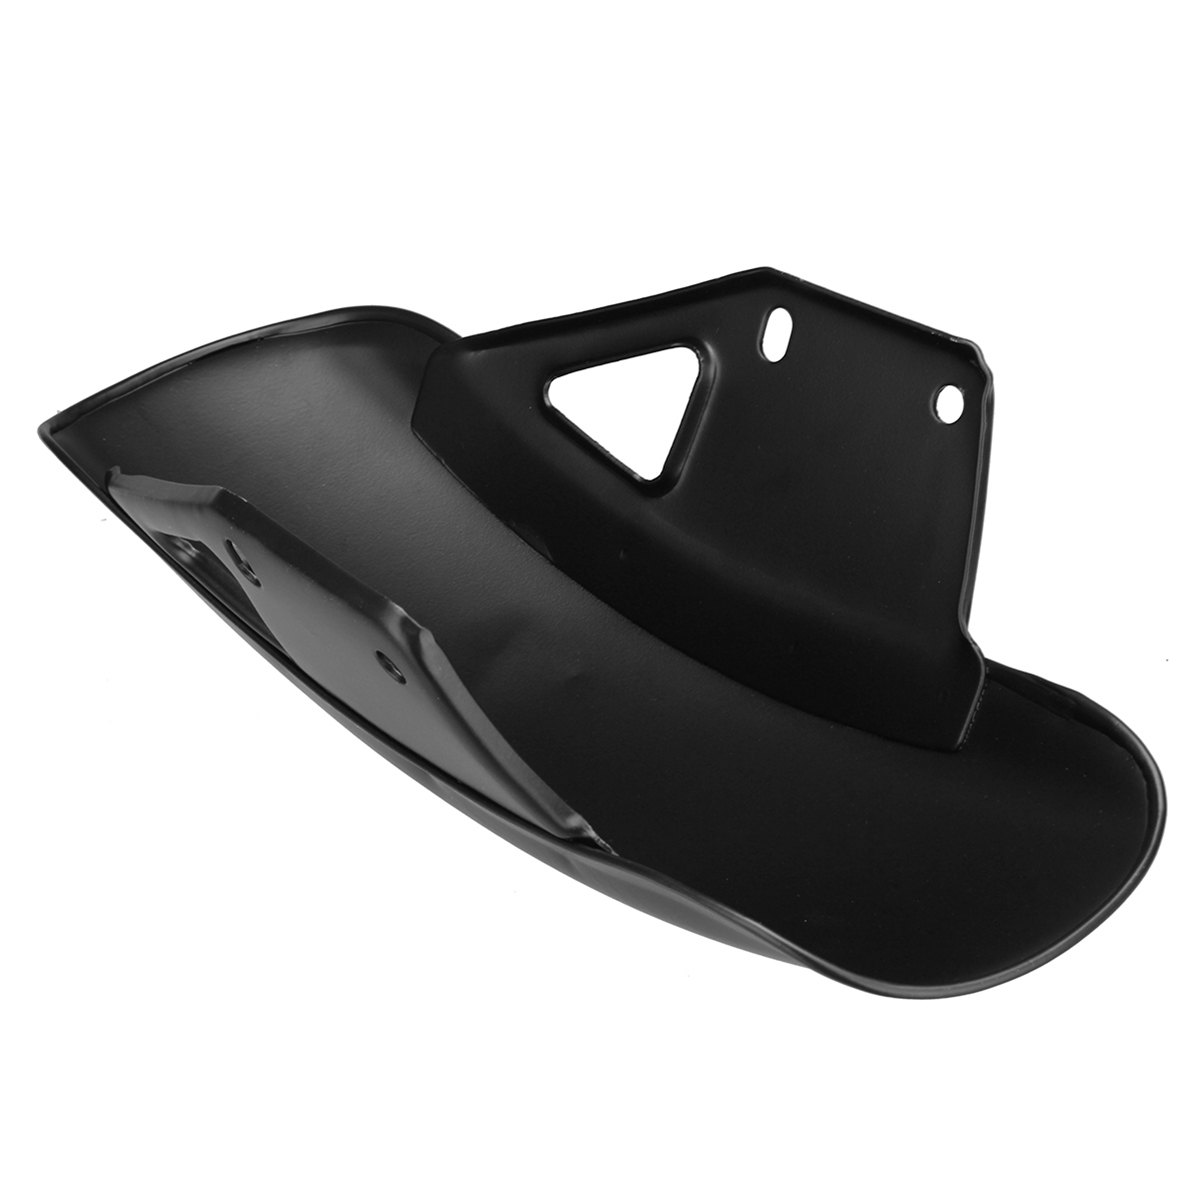 Motorcycle Front Mudguard Fairing Mug Guard Cover for Suzuki GN125 GN250